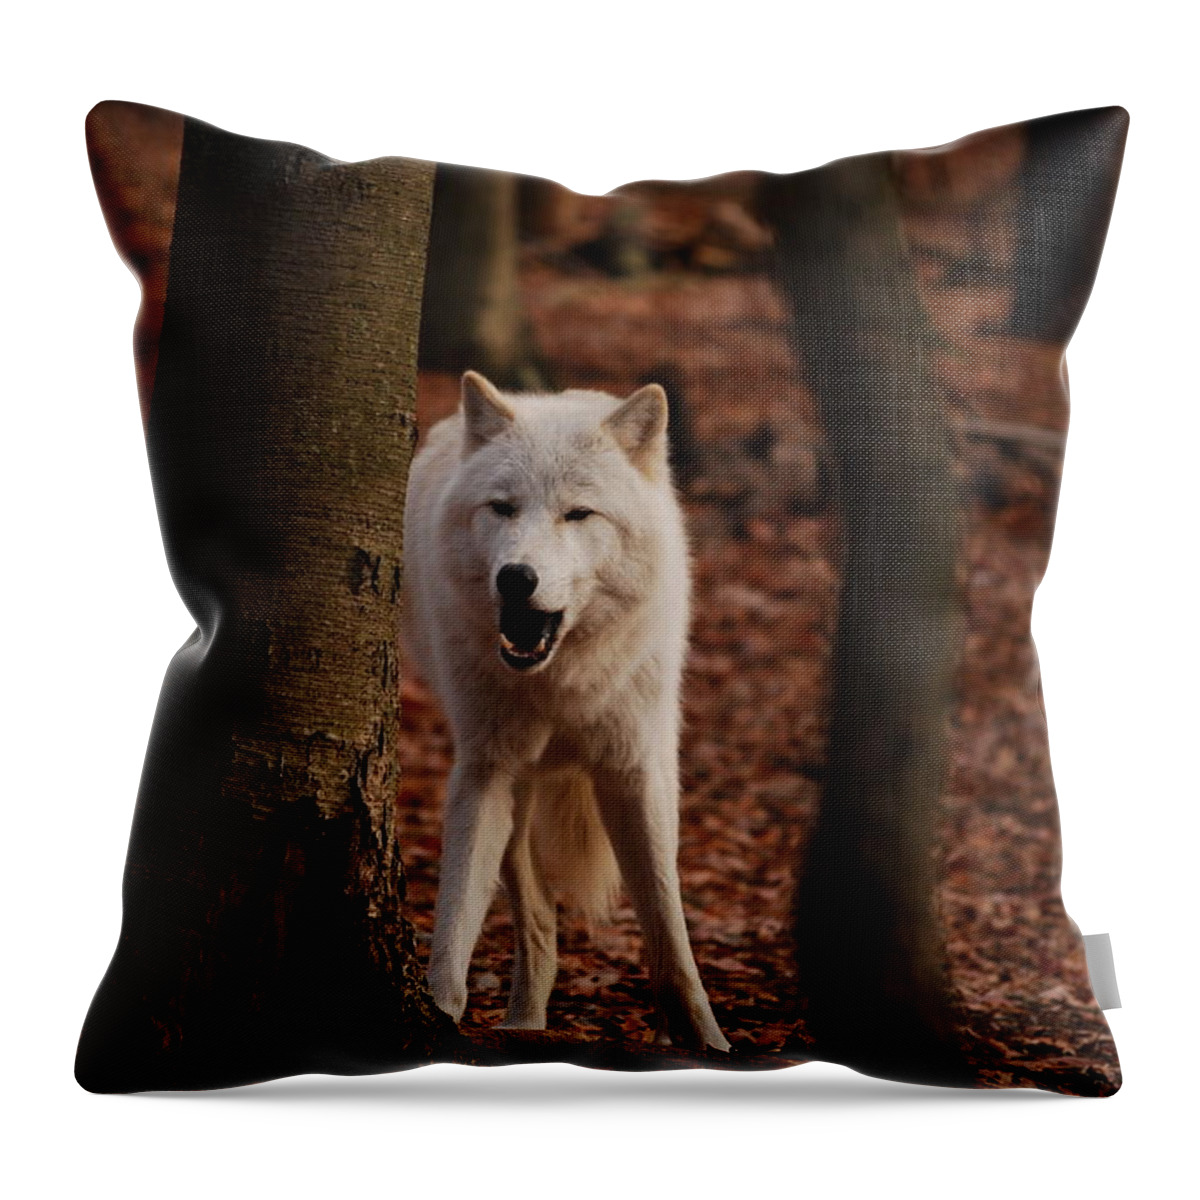 Wolf Throw Pillow featuring the photograph Gotta Laugh by Lori Tambakis